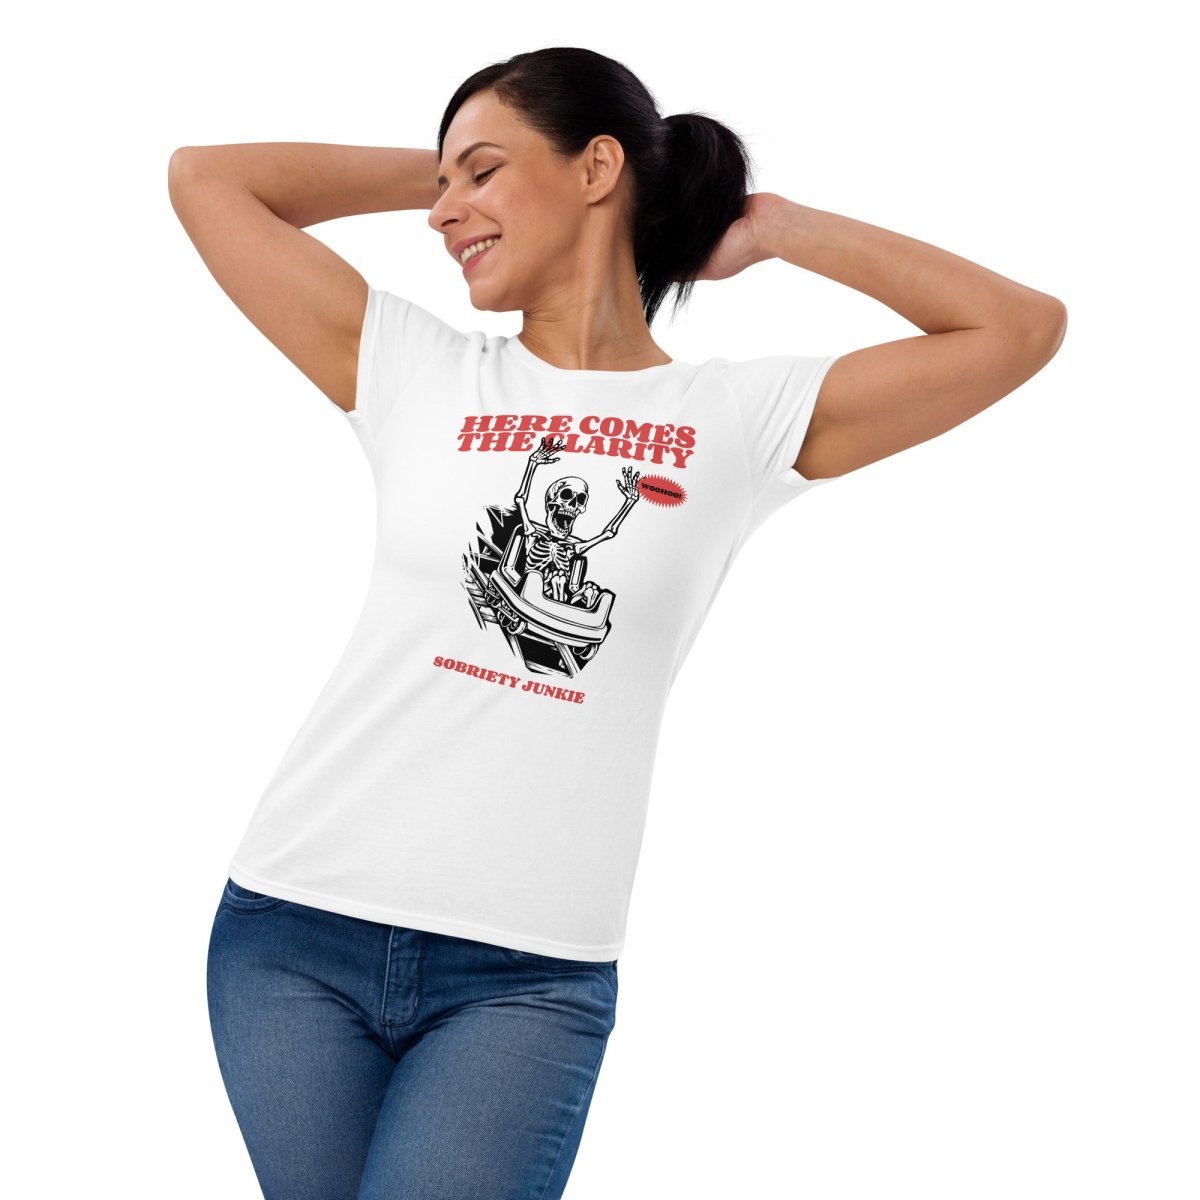 Here Comes the Clarity Women's Short Sleeve T - shirt - Sobervation